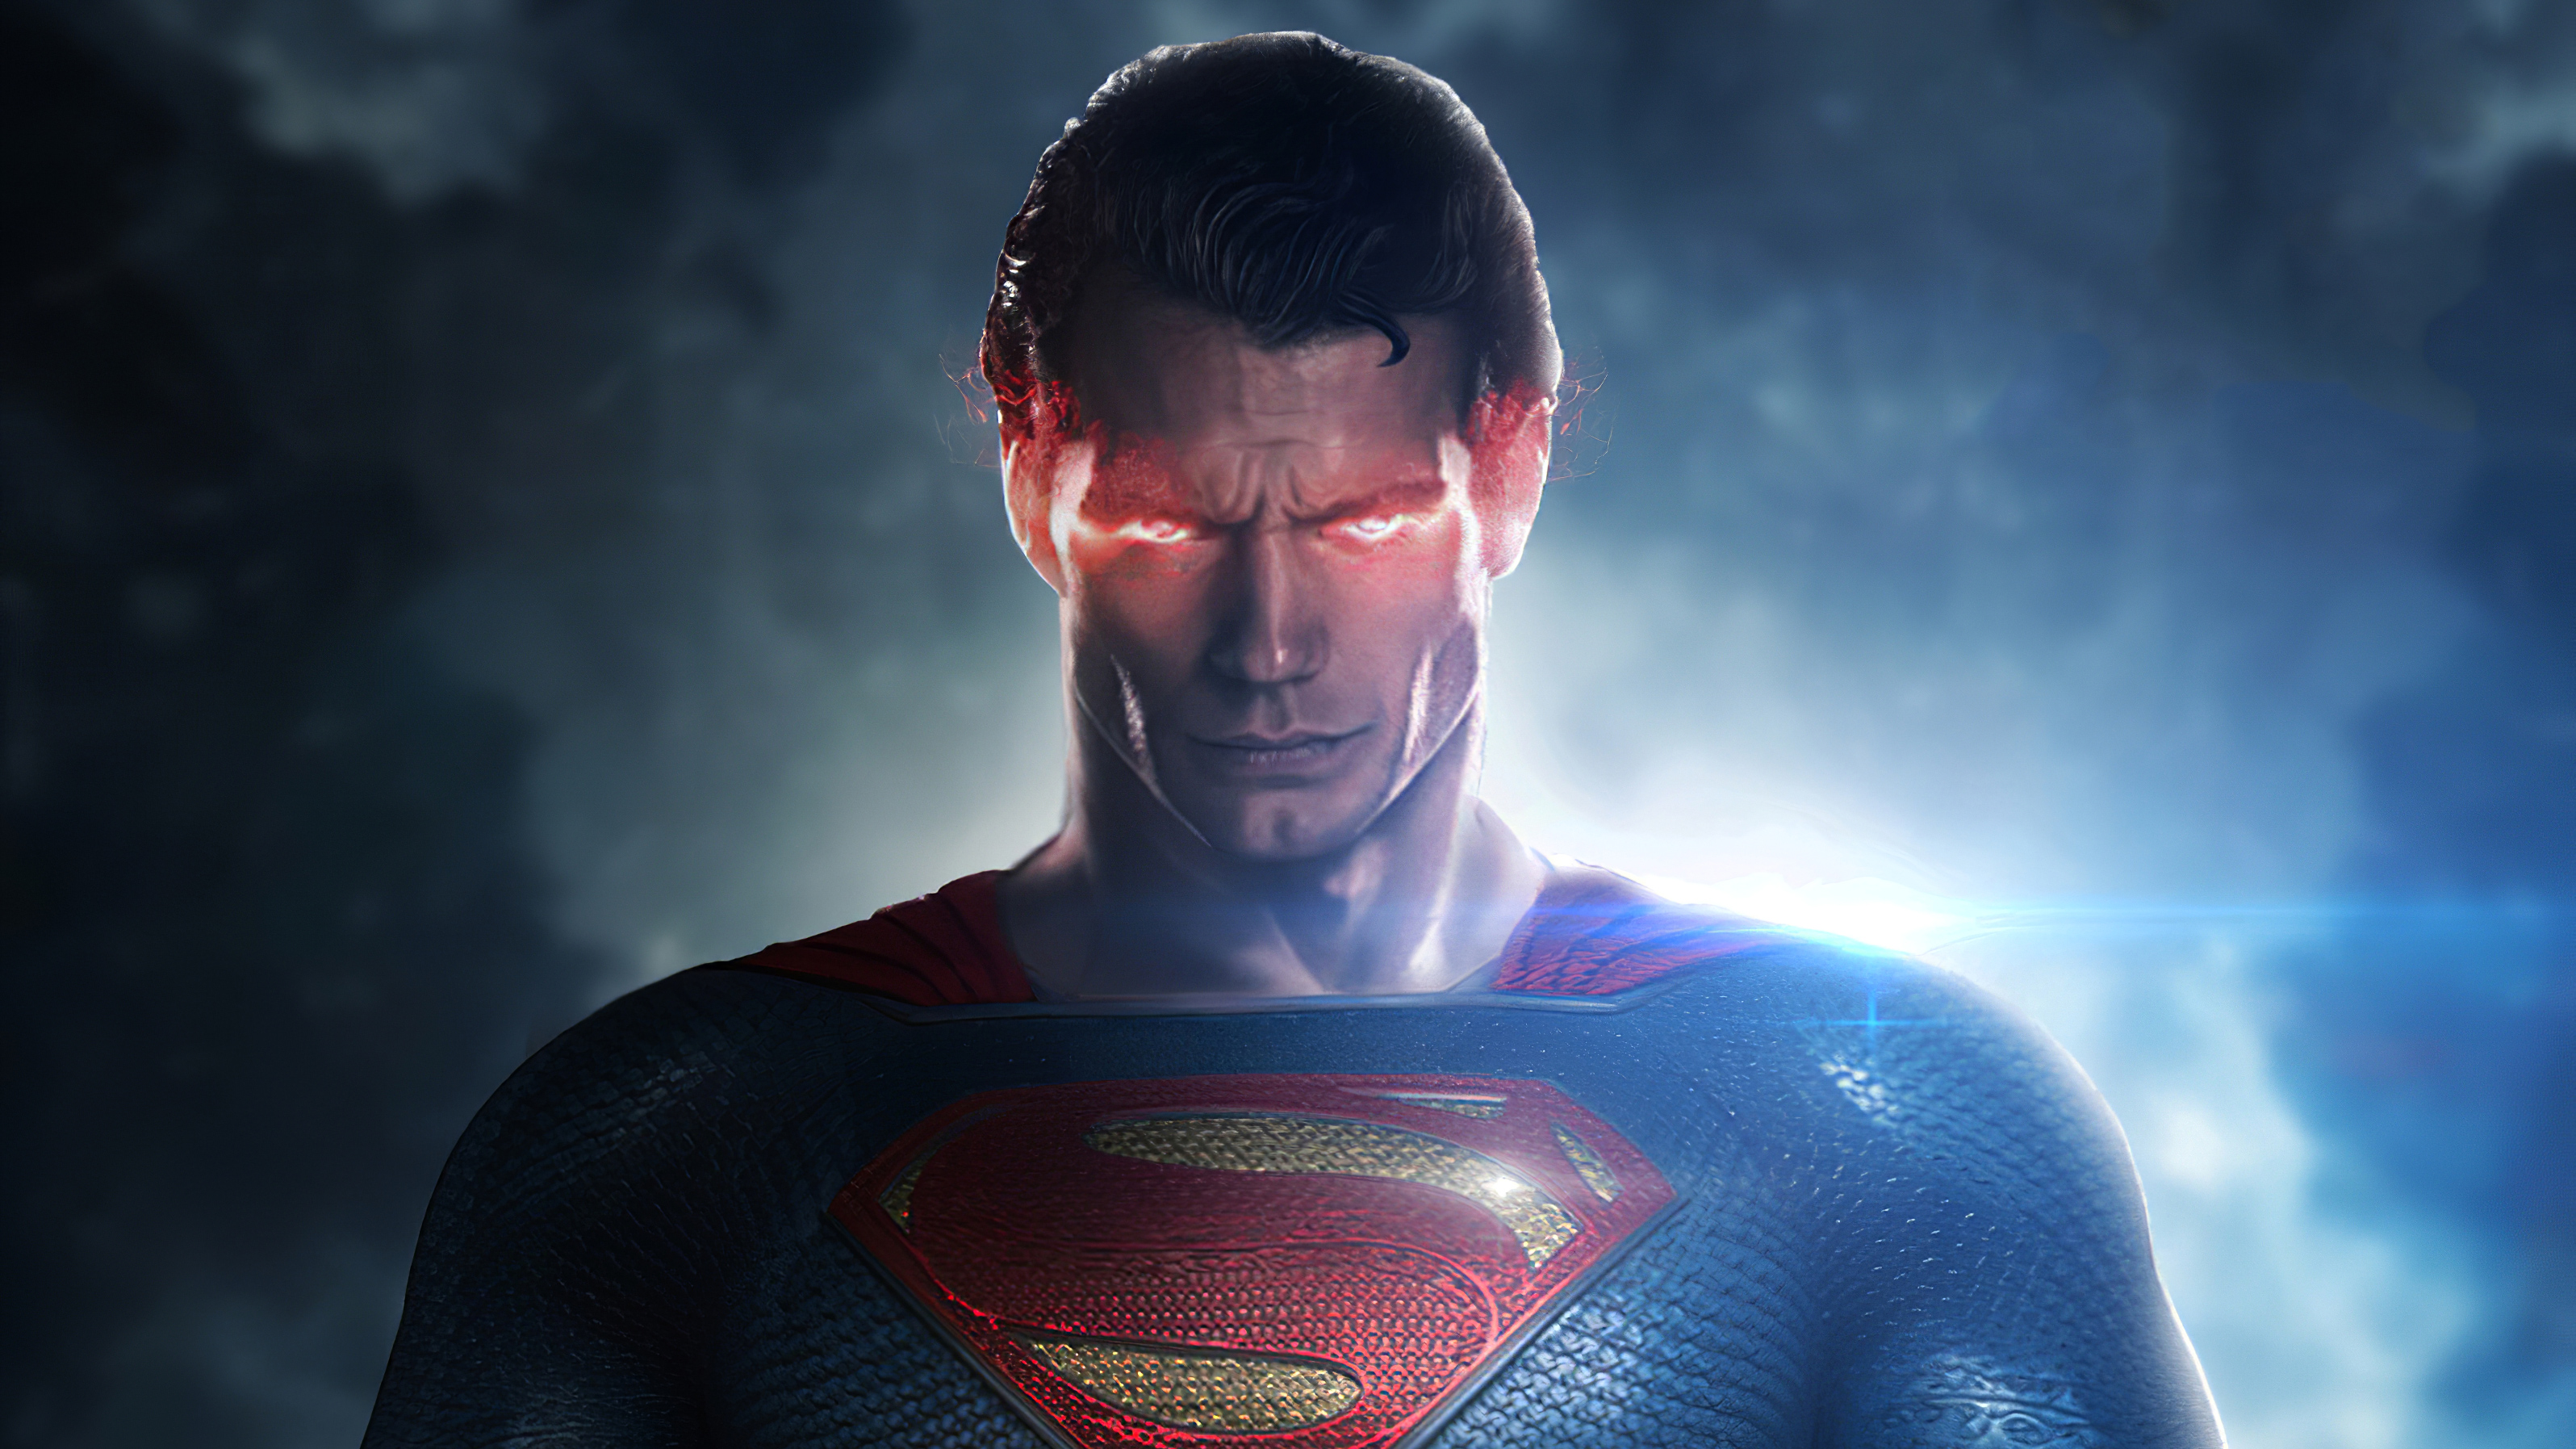 Henry Cavill as Superman Wallpapers, HD Wallpapers